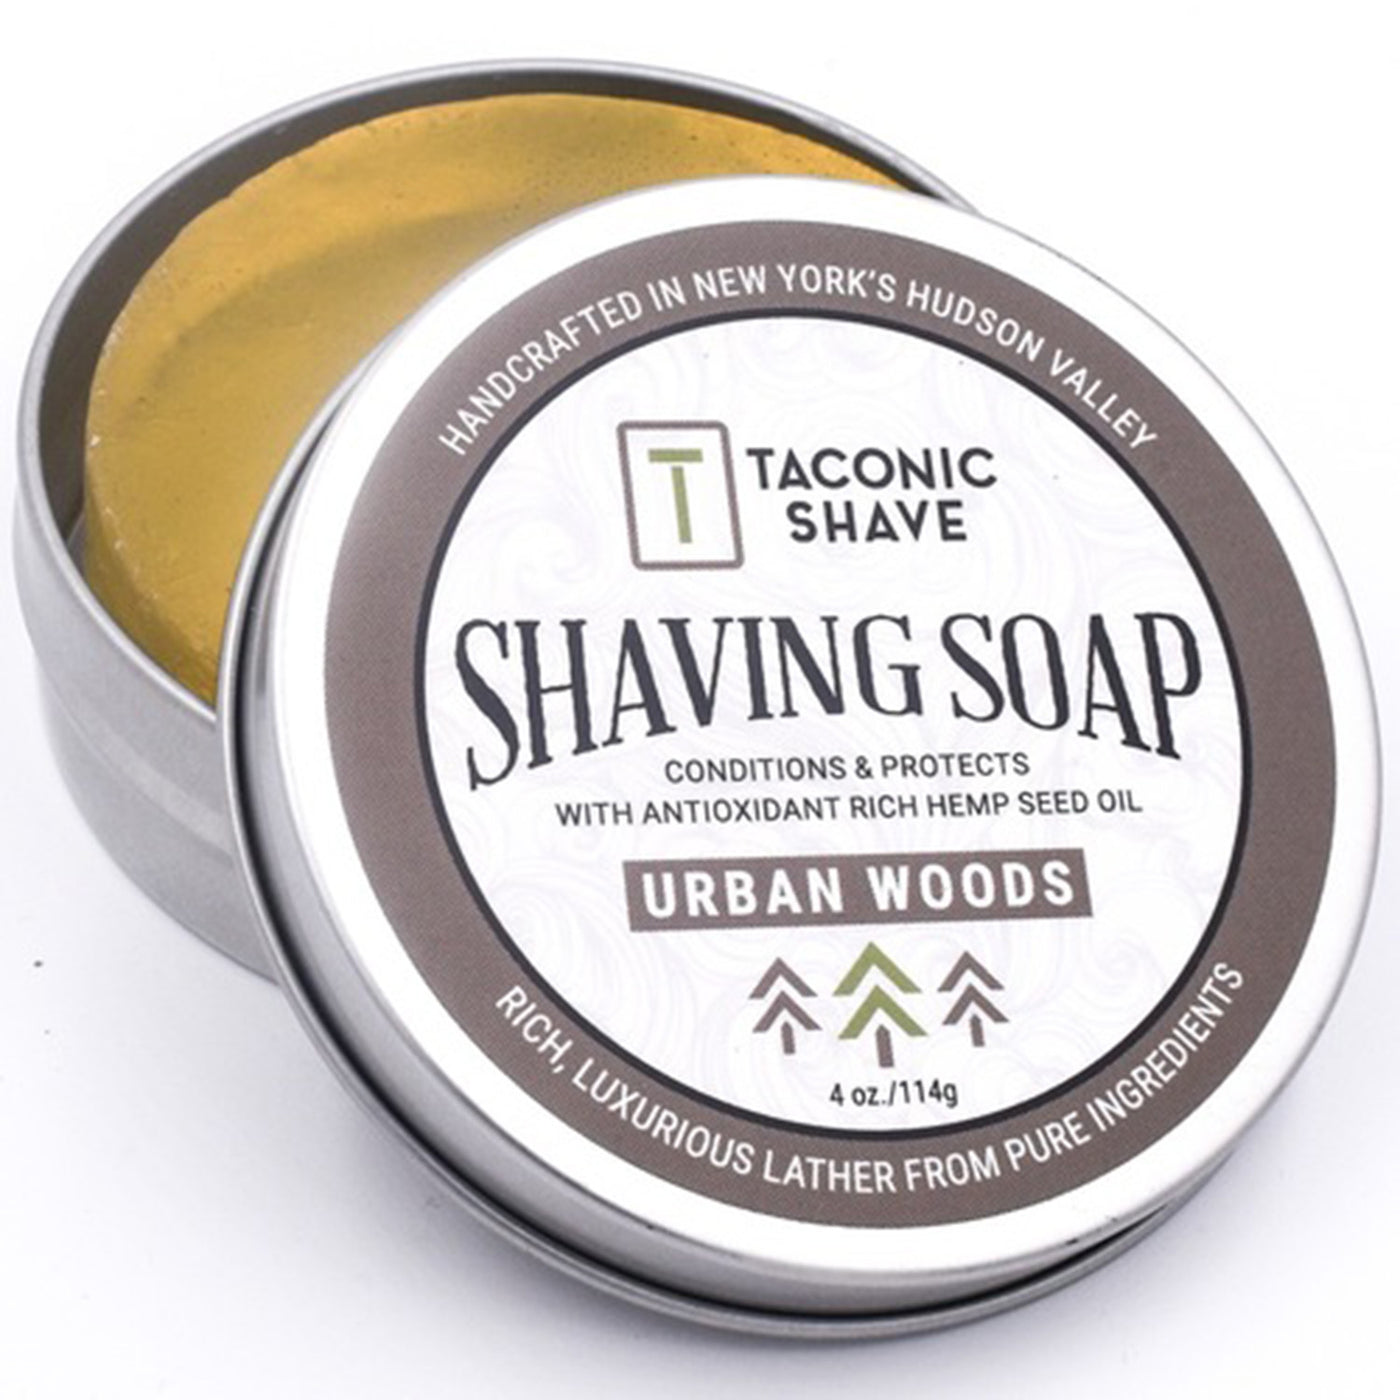  Taconic Shave Urban Woods Gift Set by Taconic Shave sold by Naked Armor Razors